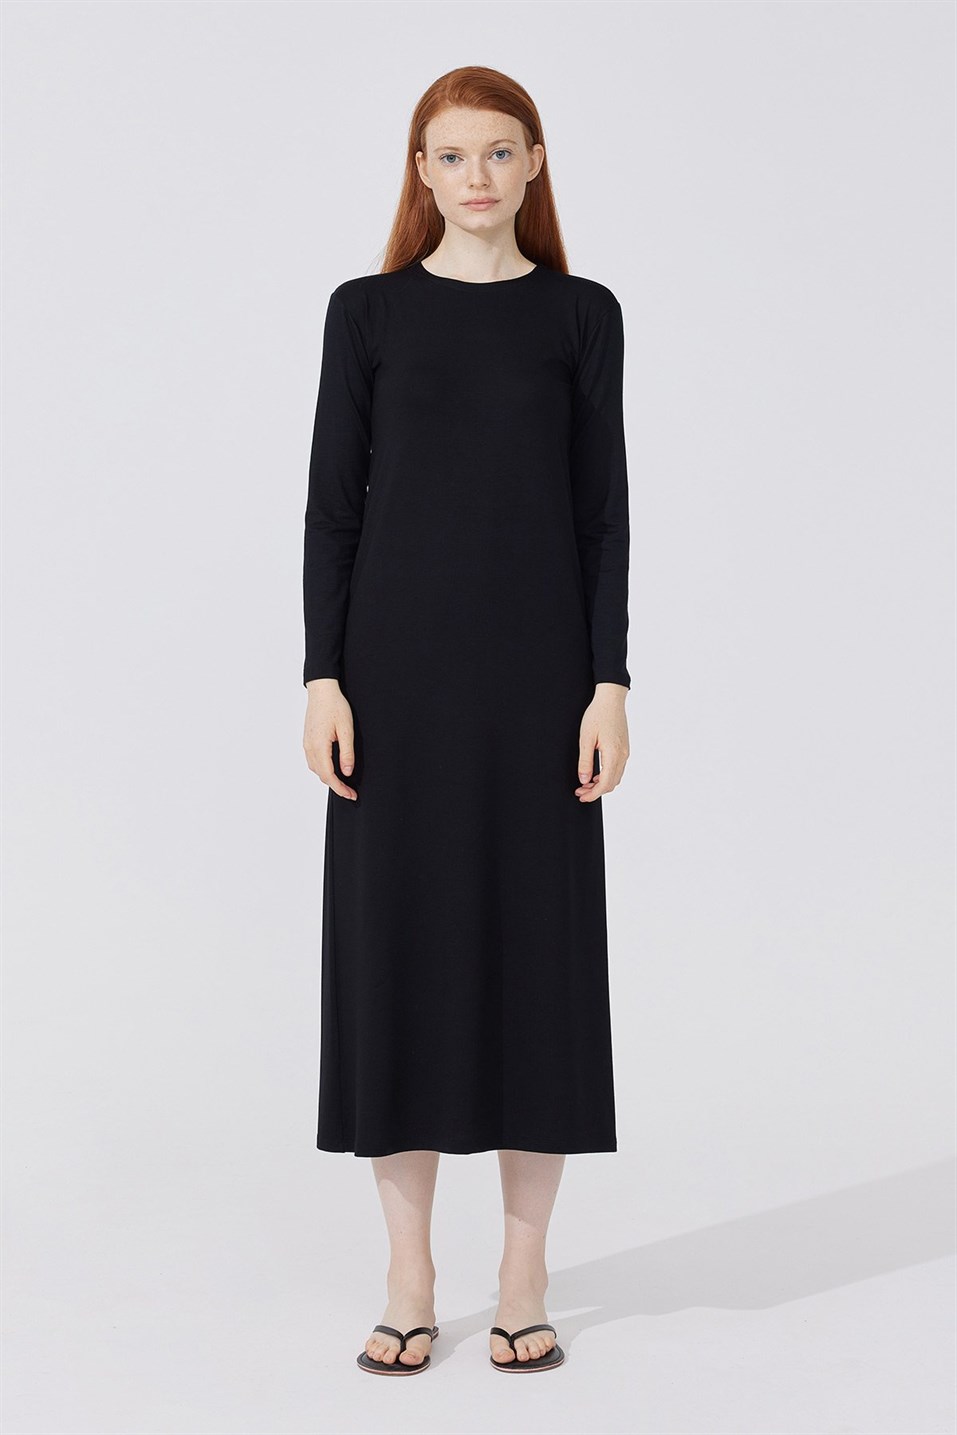 Black Long Sleeve Combed Cotton Dress